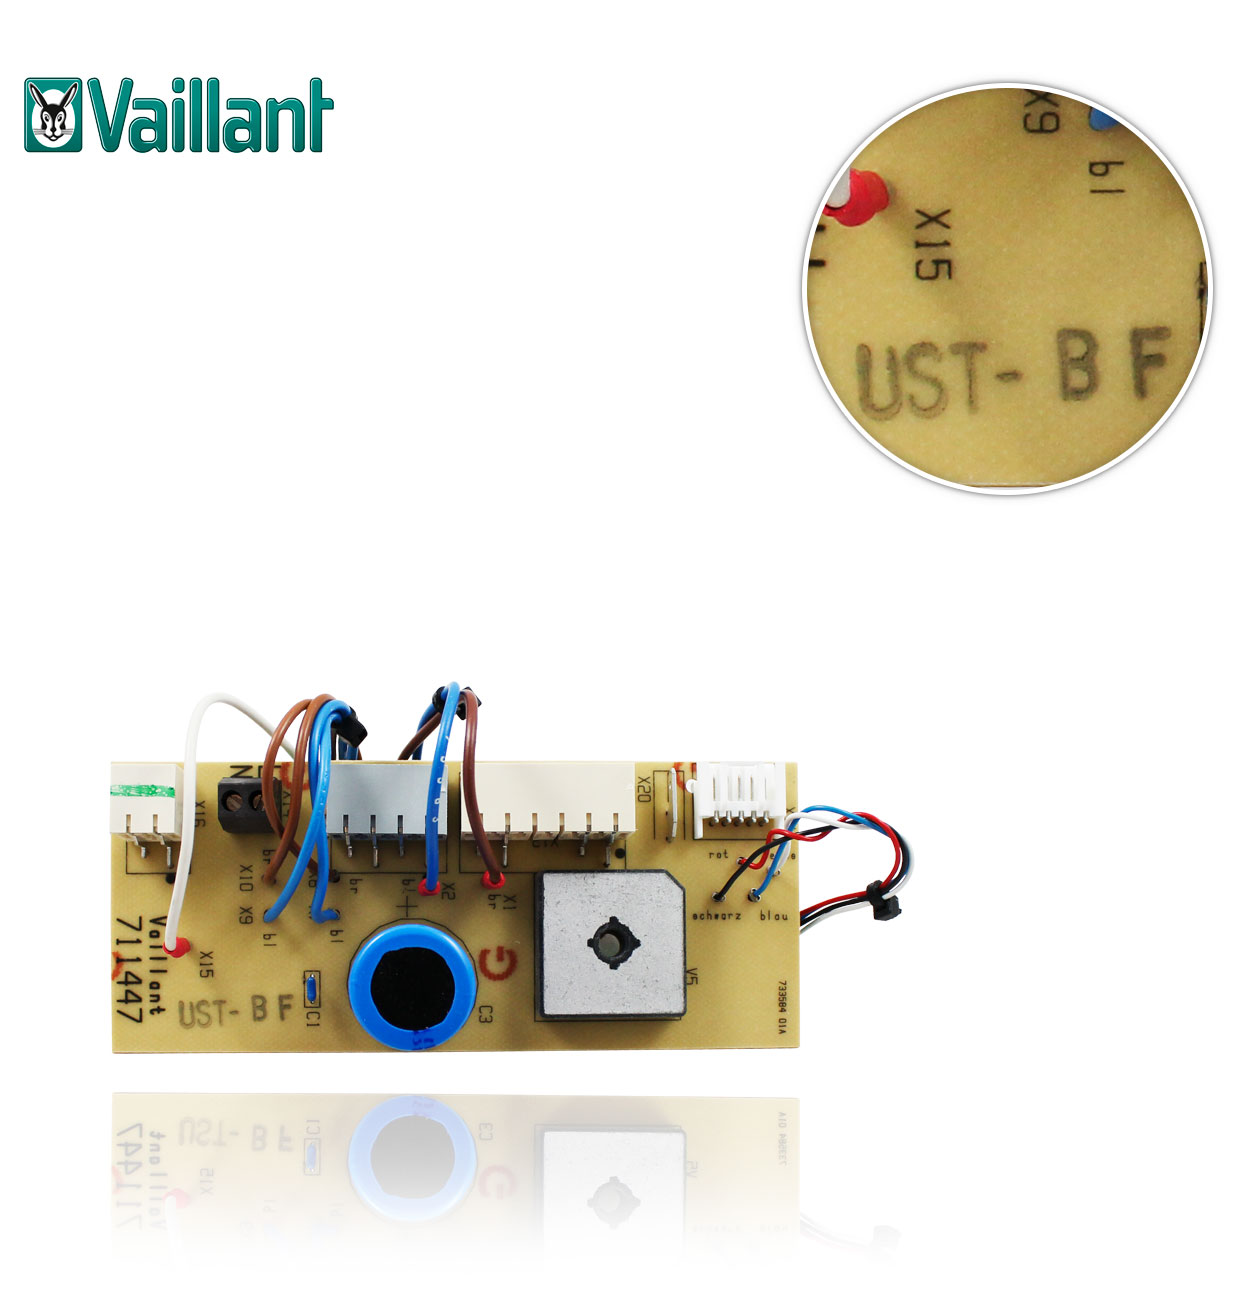 ELECTRONIC CONTROL PANEL FOR VAILLANT 130382 MAG 275/10EW